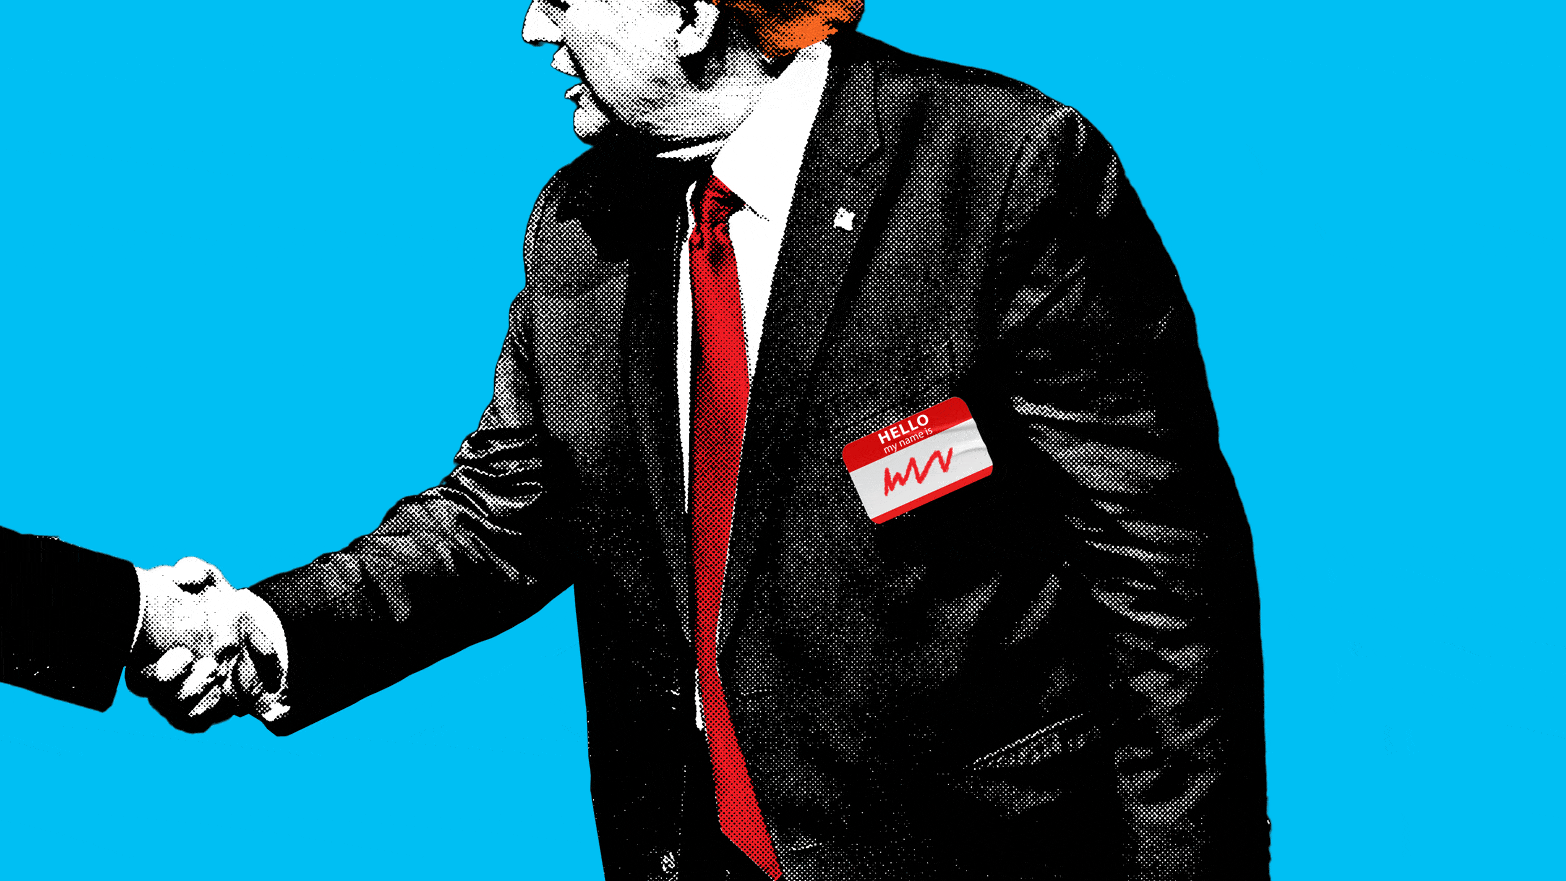 A photo illustration of Donald Trump wearing a "hello my name is" badge shaking hands with someone 